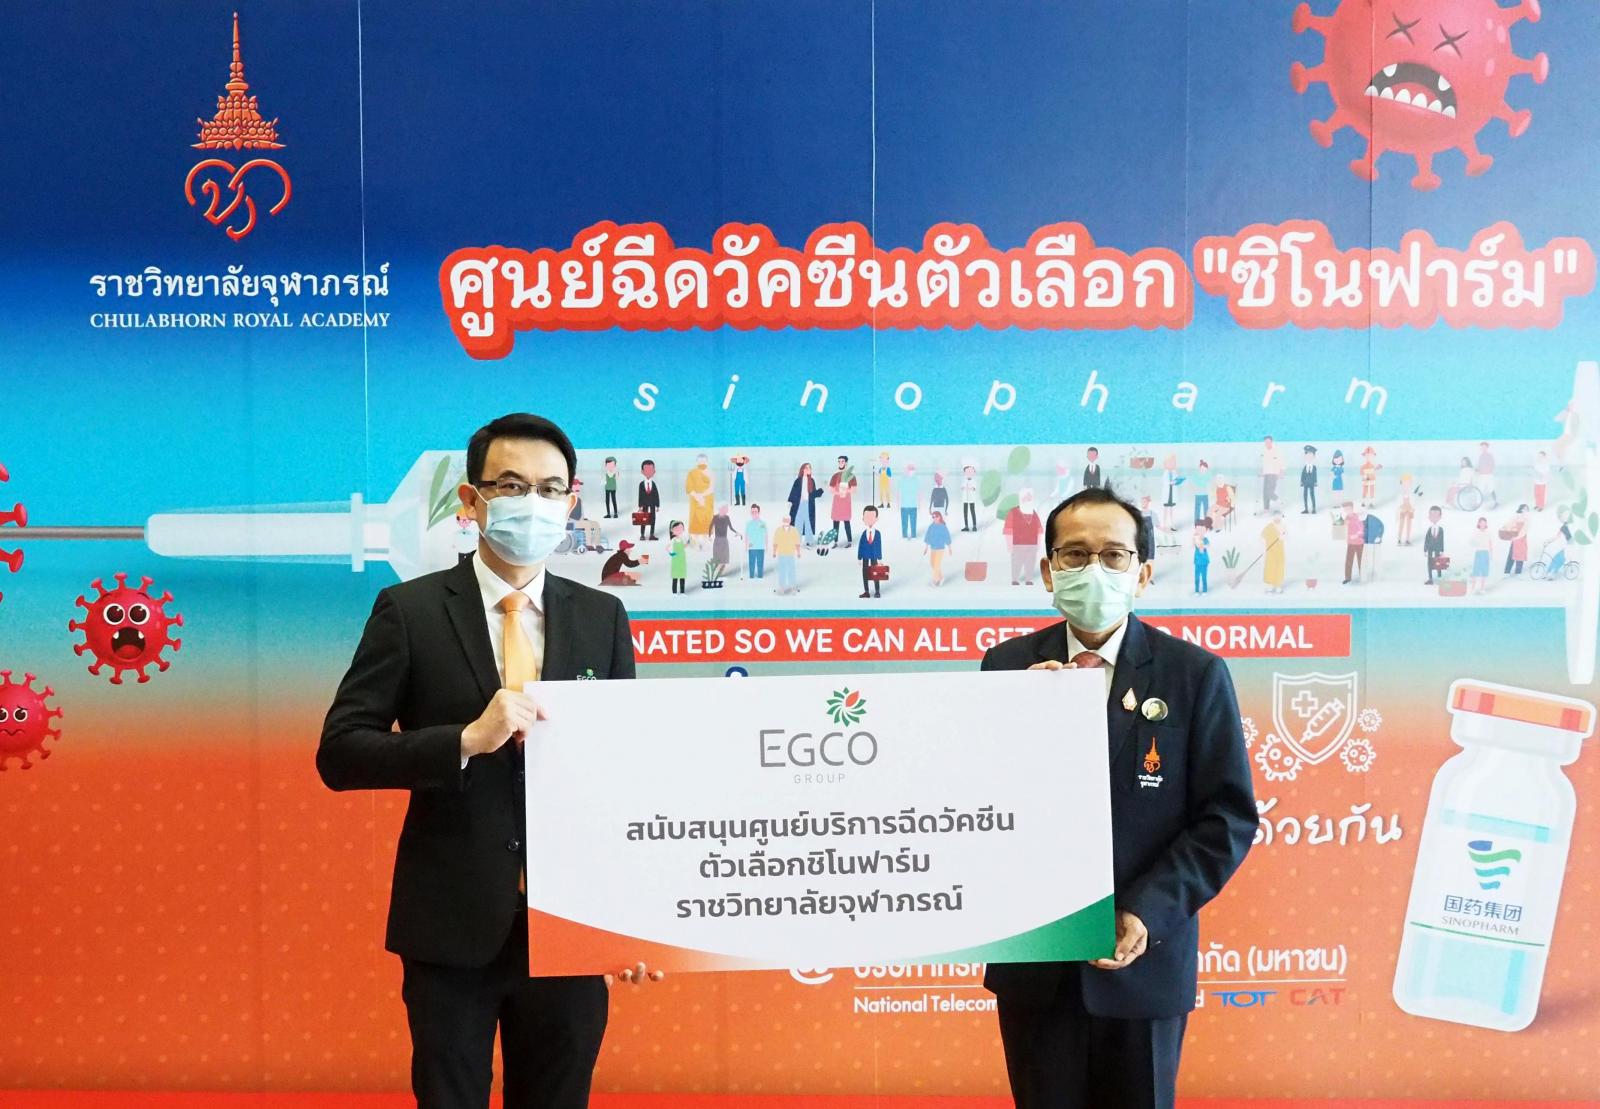 EGCO Group support sinopharm vaccination service center of chulabhorn royal colege by providing food and beverages to encourage medical personnel and volunteers